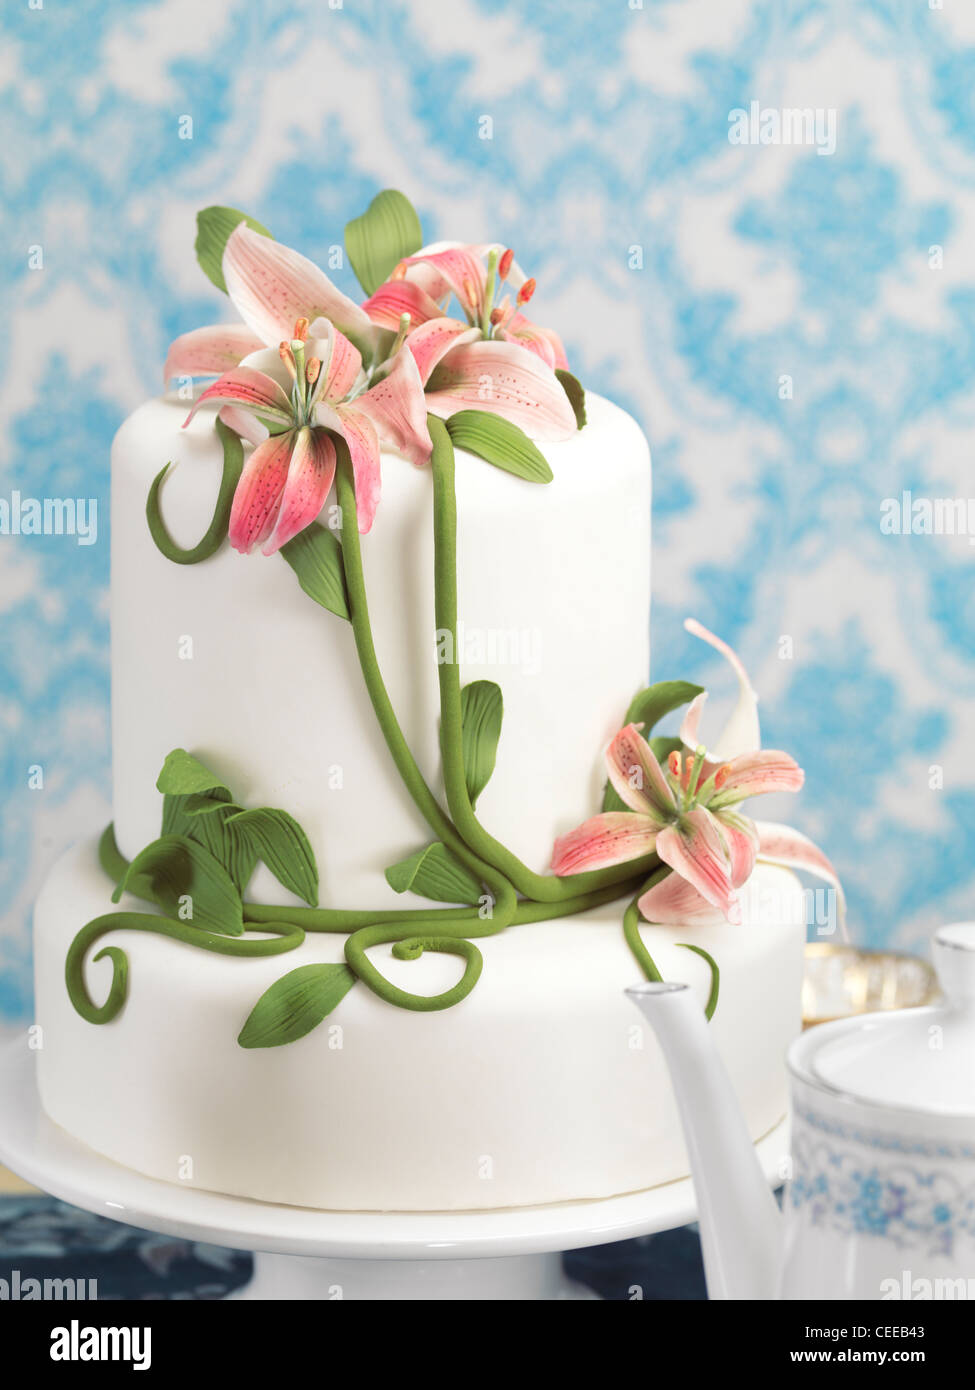 Fancy cake decorated with lilies on a table Stock Photo